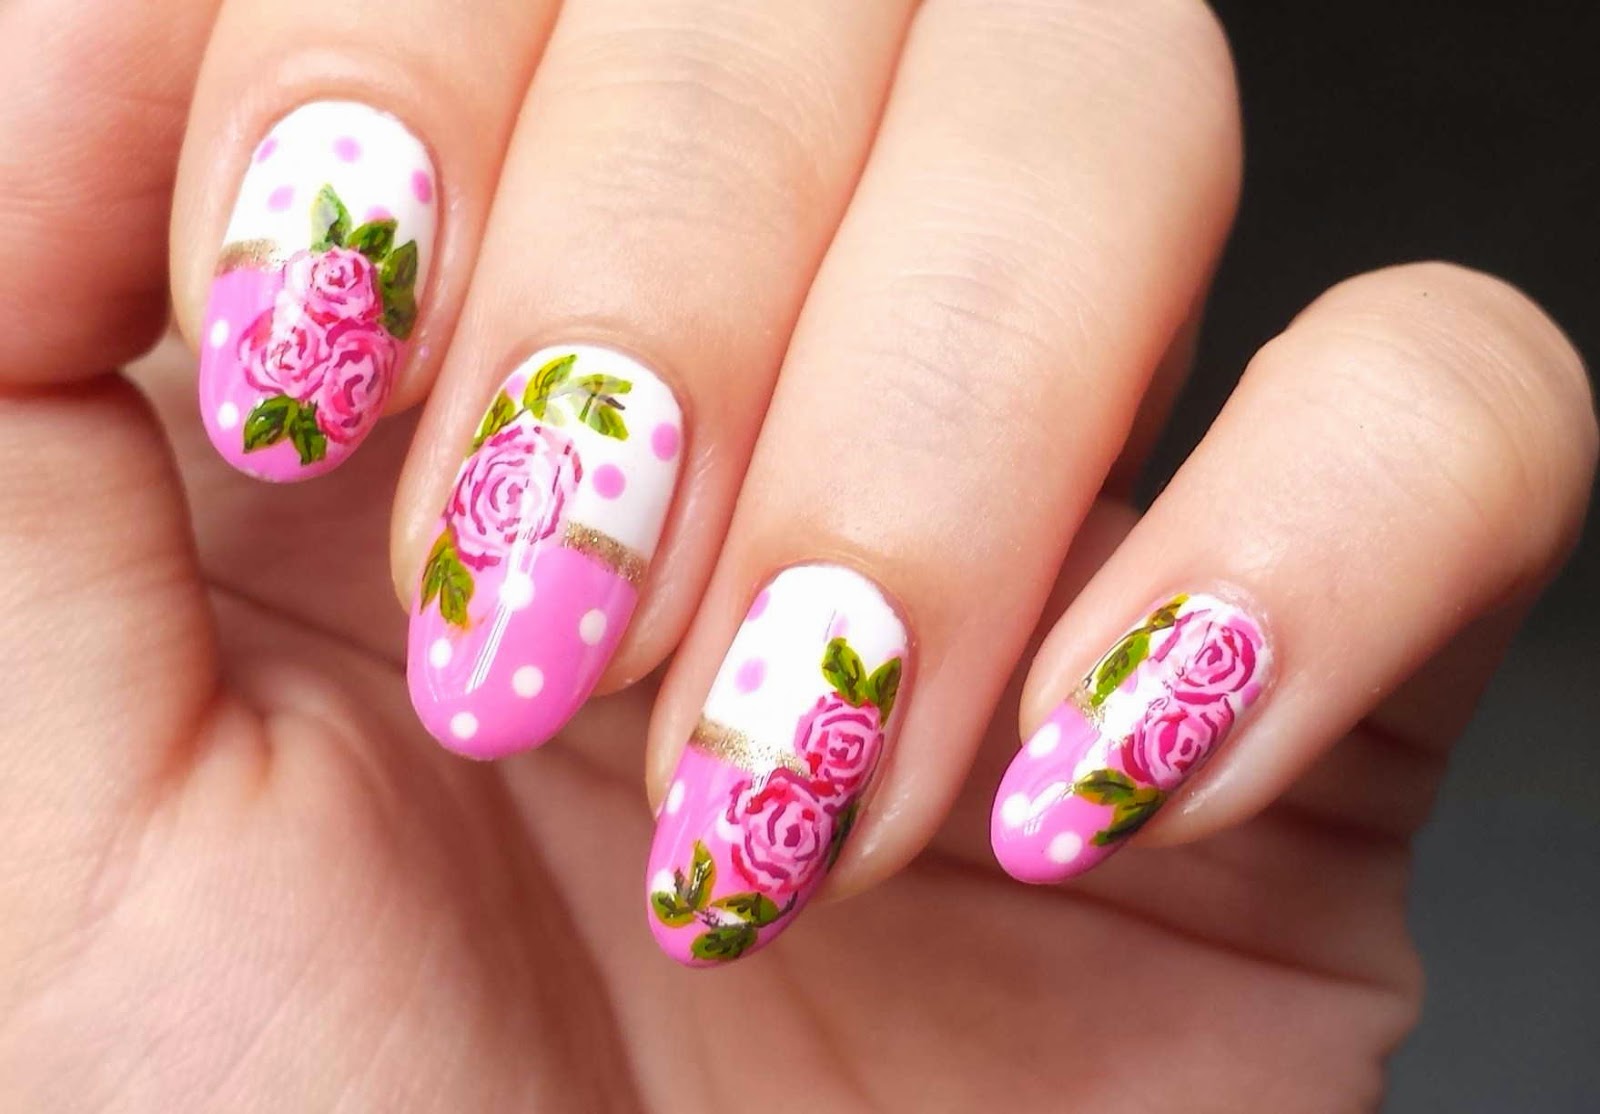 7. Glamorous Nail Art for the Mature Woman - wide 7